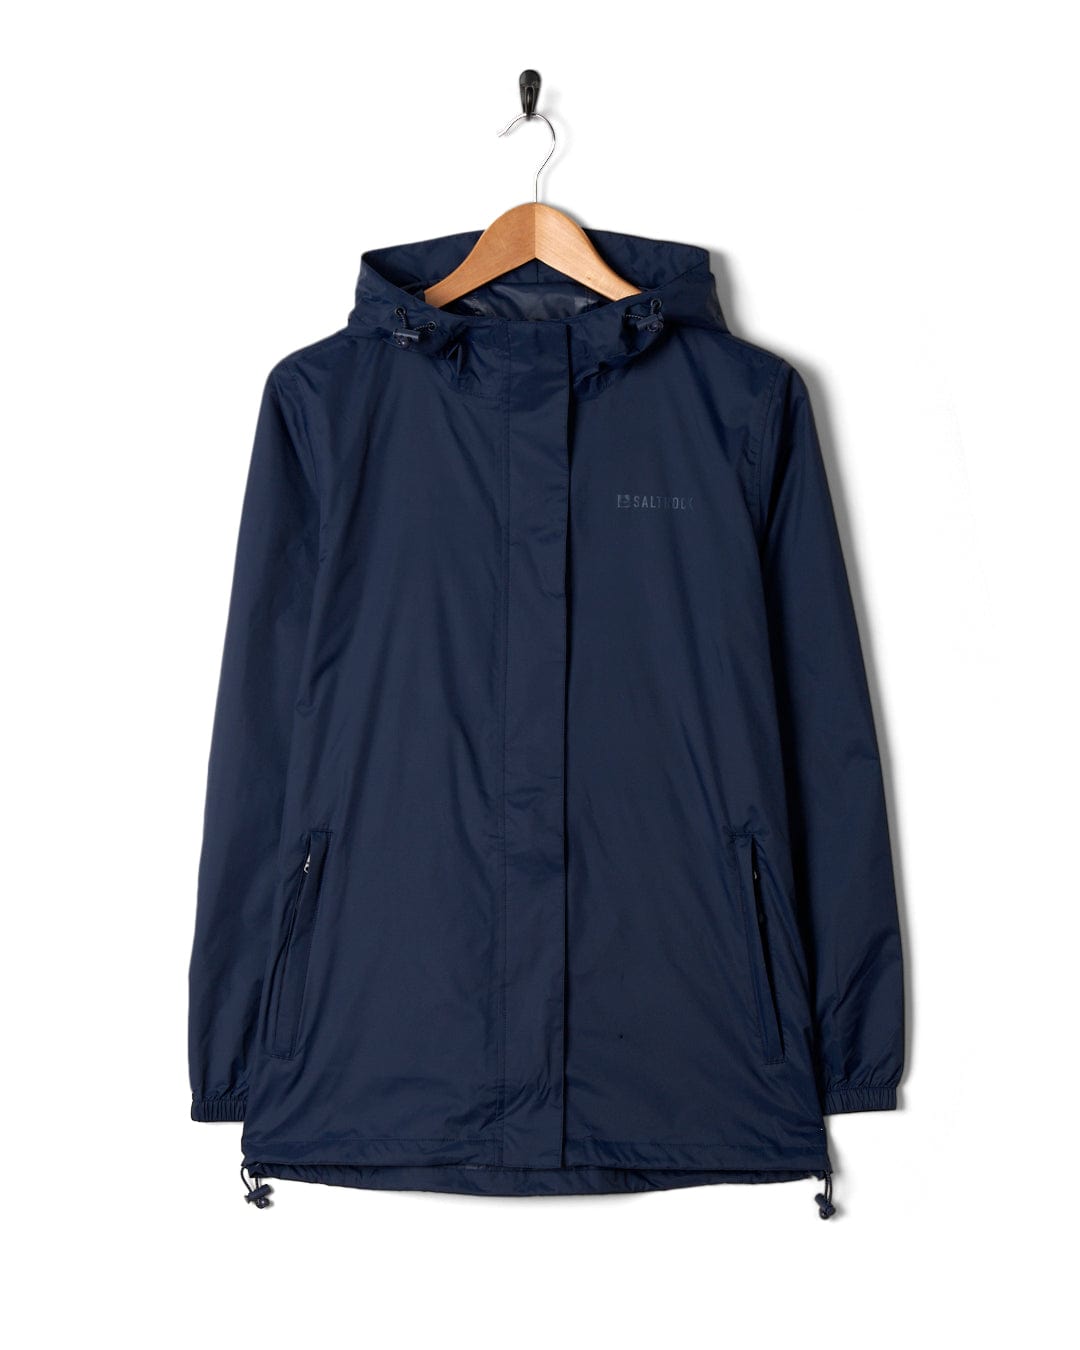 A Cooper - Womens Packable Waterproof Jacket in Blue by Saltrock hanging on a wooden hanger against a white background.